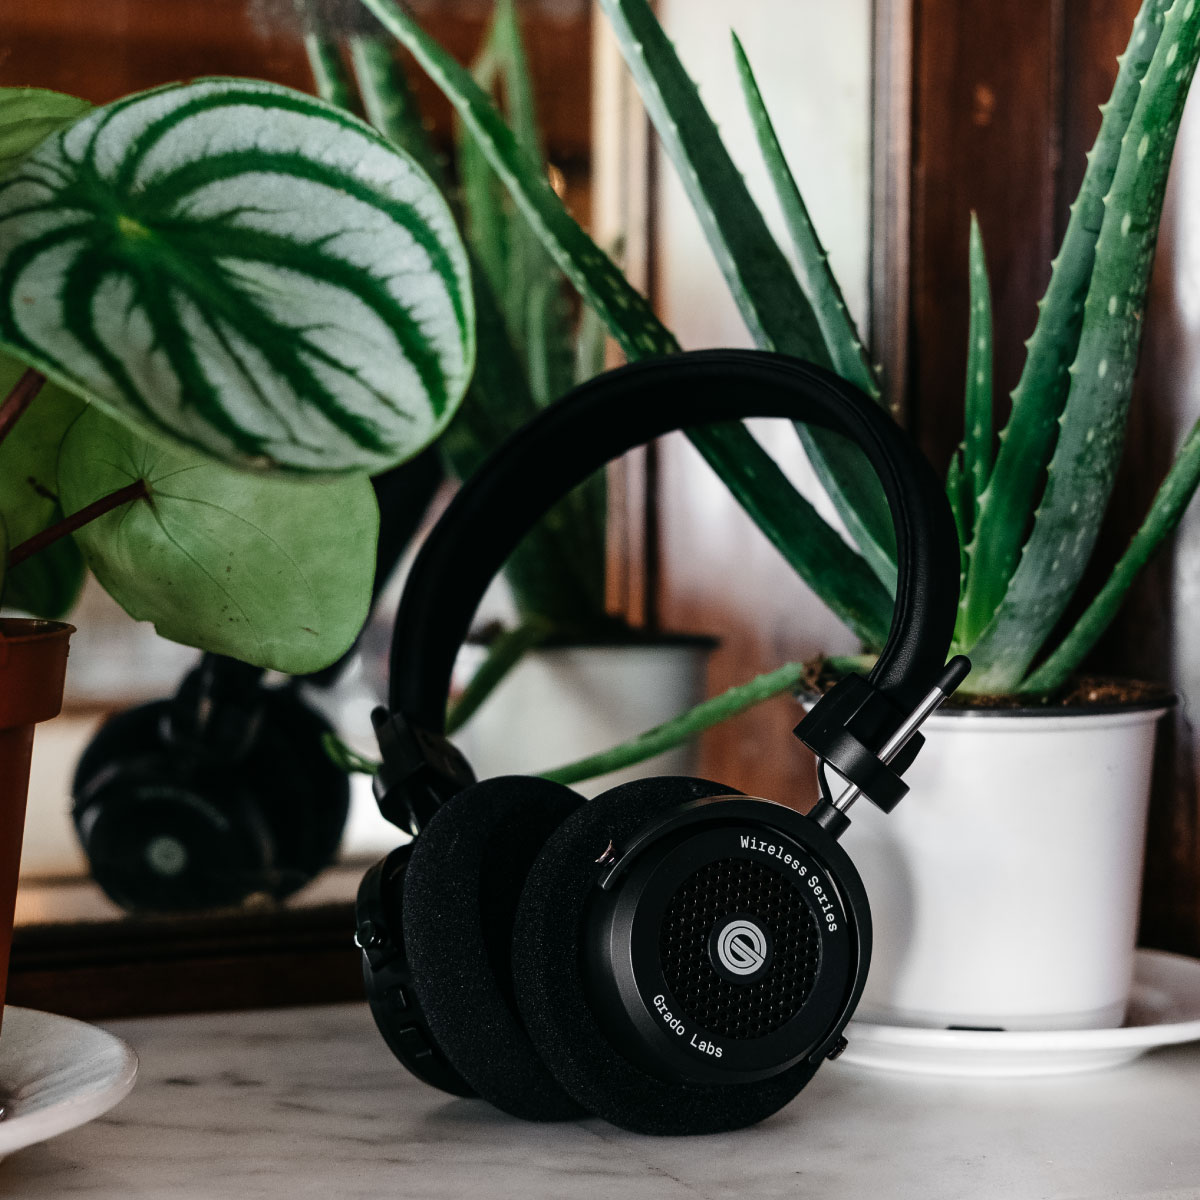 Photo of gw100 headphones resting on a marble table in front of plants